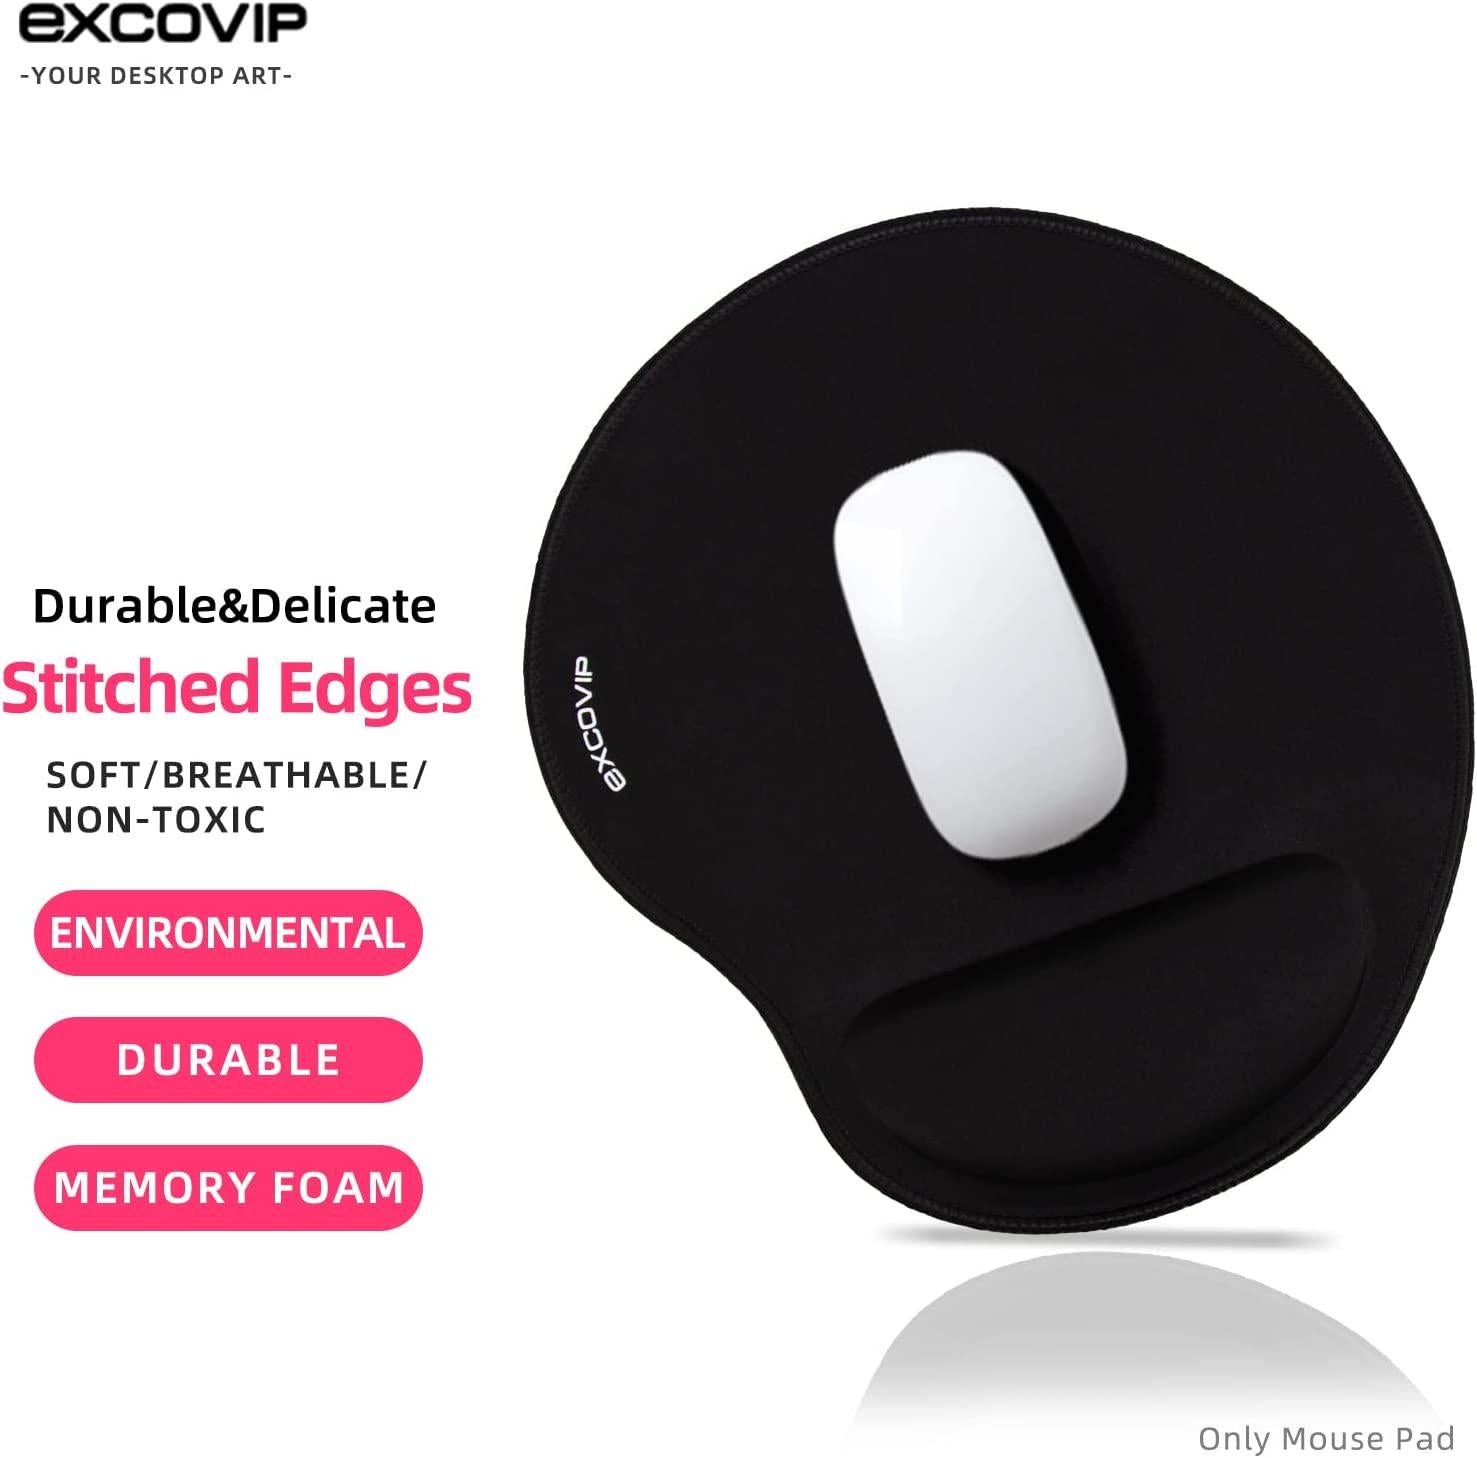 excovip, Ergonomic Stitched Edges Mouse Pad with Wrist Support -Excovip Smooth Surface Wrist Rest Mousepad, Black Mouse Mat with Non-Slip Rubber Base and Soft Memory Foam 9101